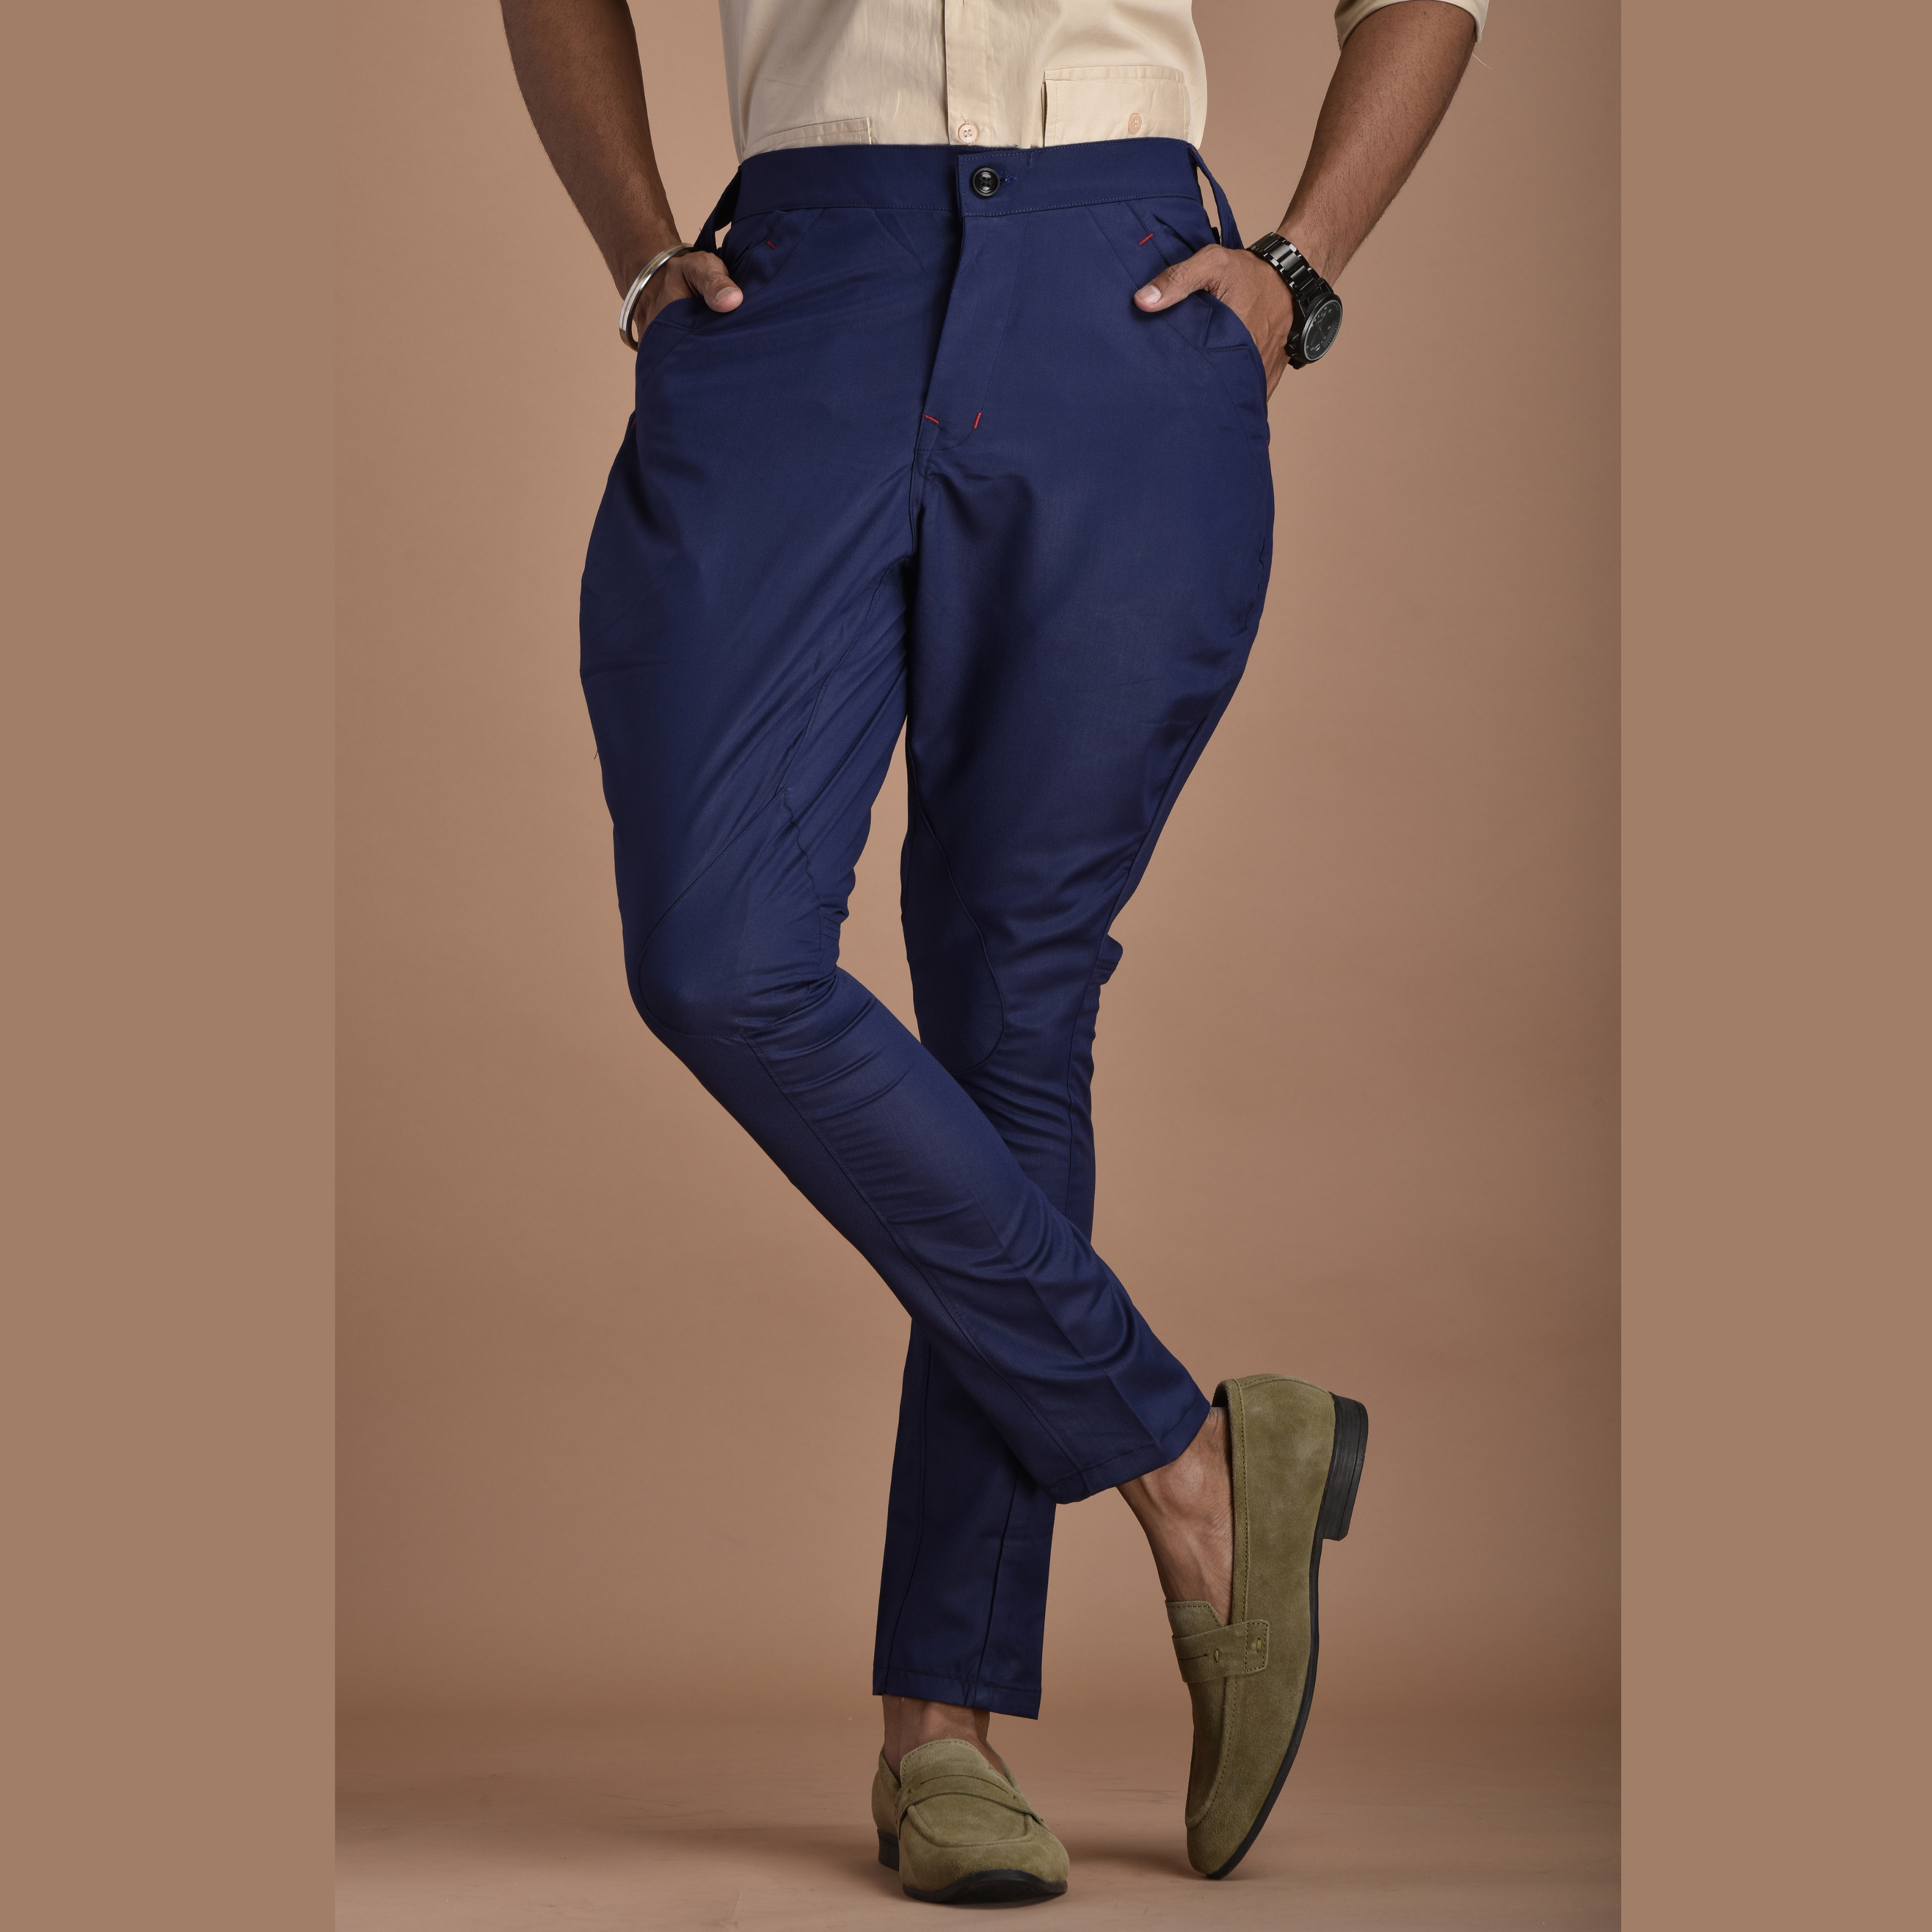 Men's Trousers Price Starting From Rs 175/Pc. Find Verified Sellers in  Jodhpur - JdMart